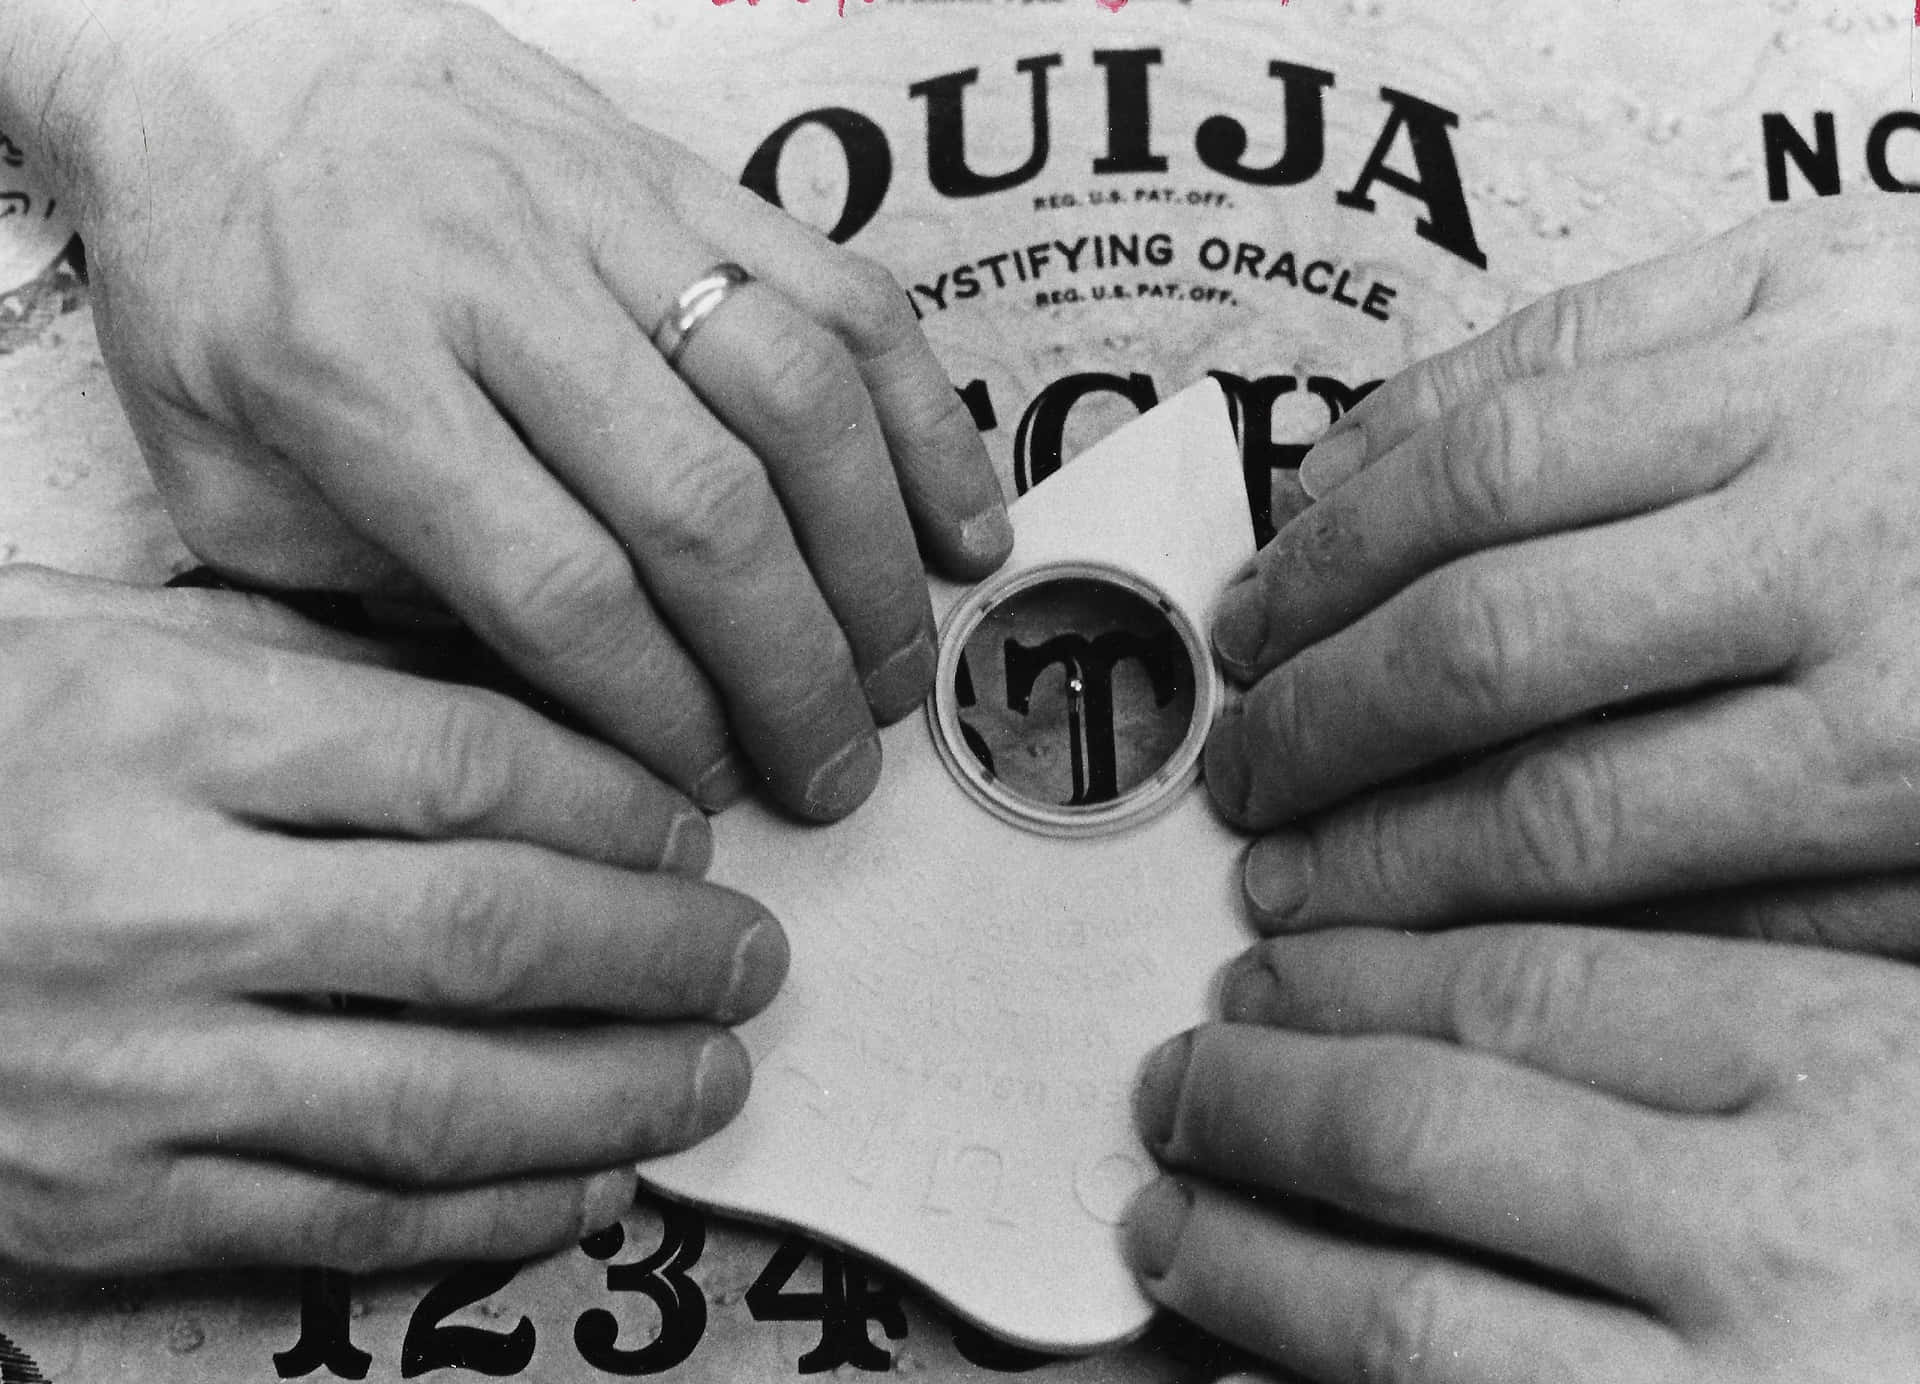 Dare to ask the spirits your questions with an Ouija board